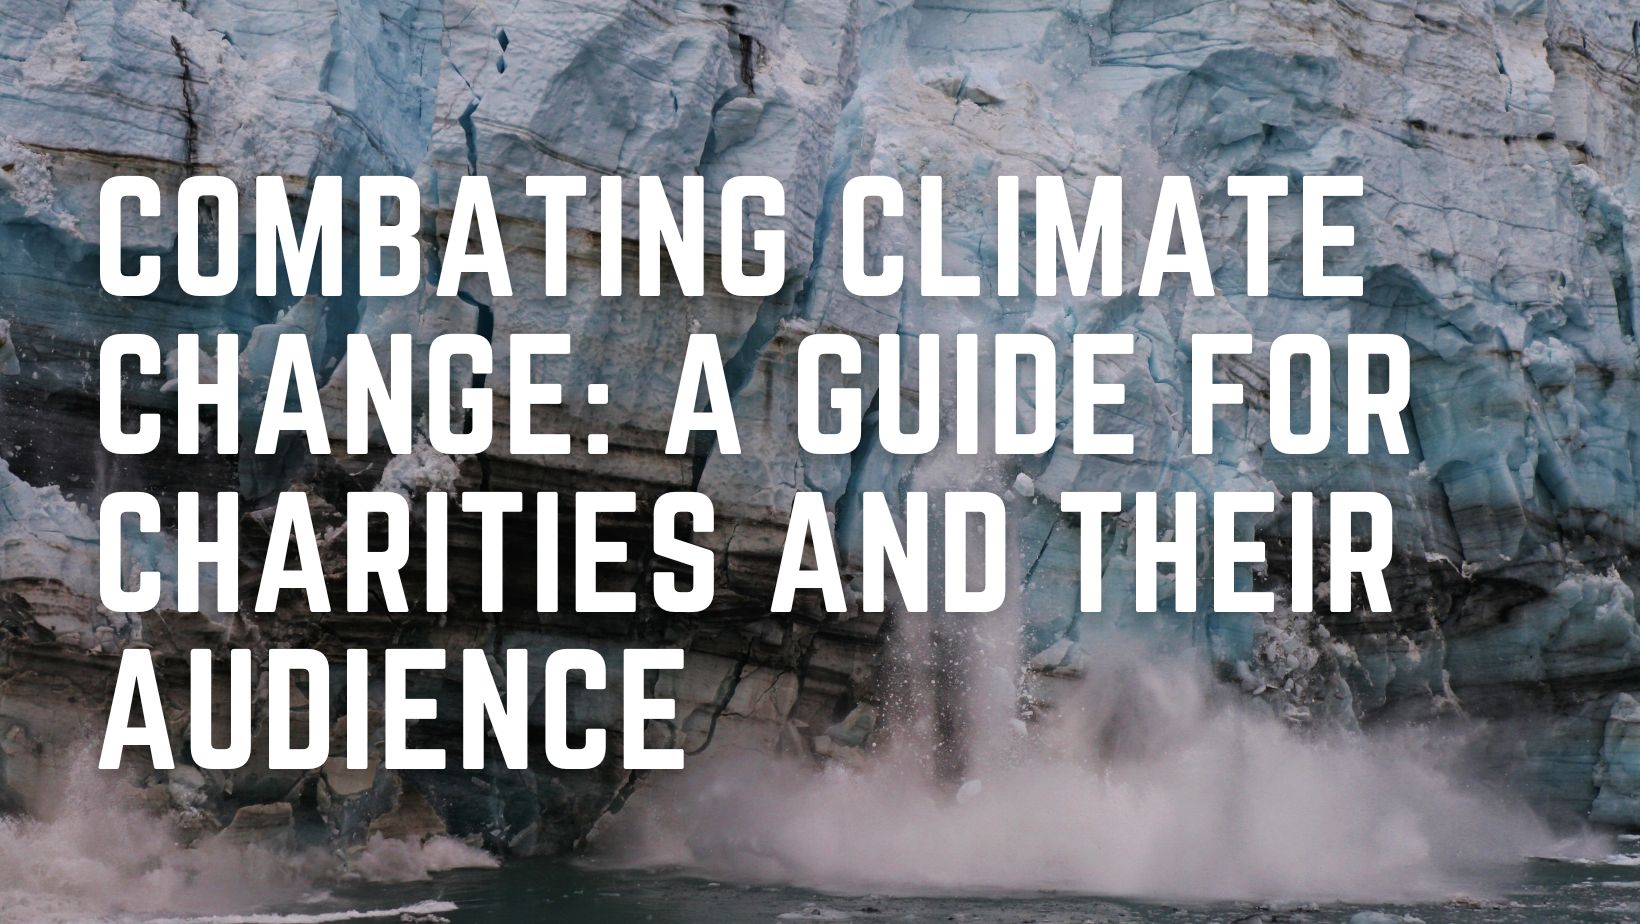 Combating Climate Change: A Guide for Charities and Their Audience